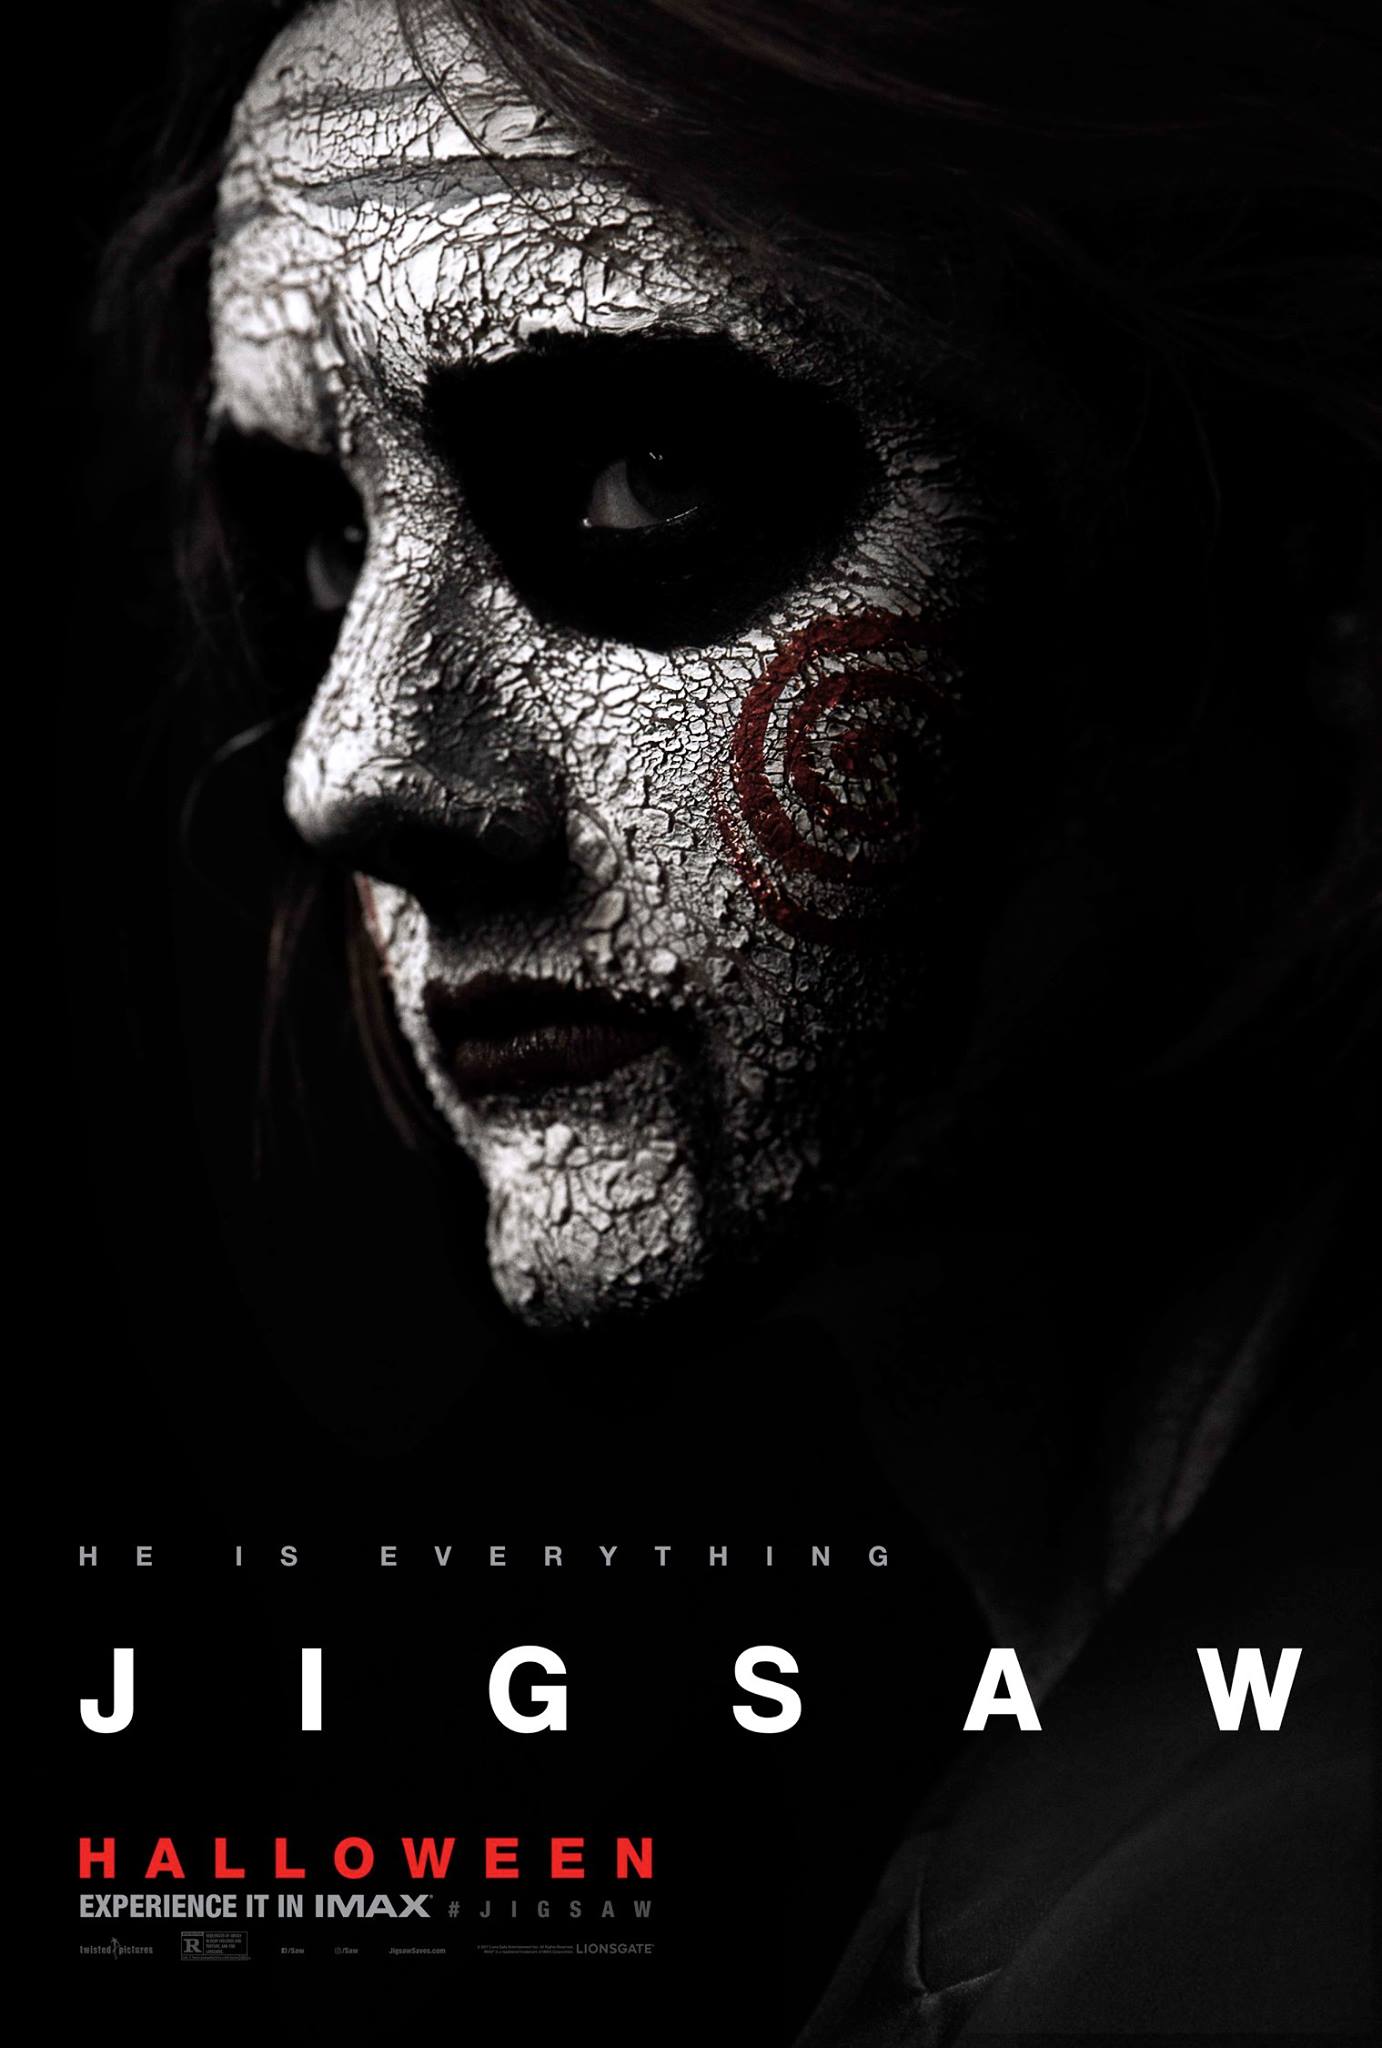 jigsaw character poster 1